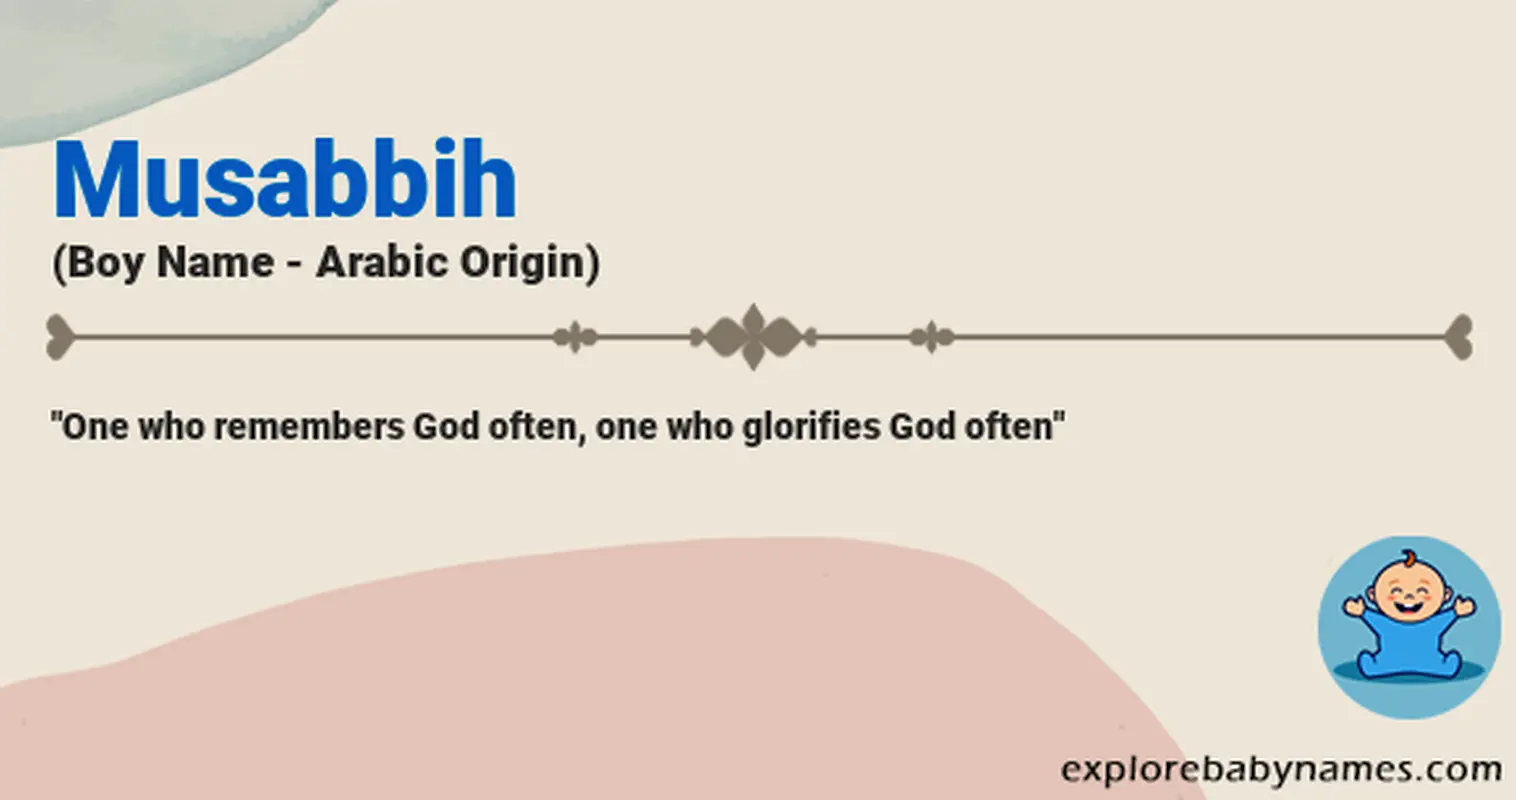 Meaning of Musabbih